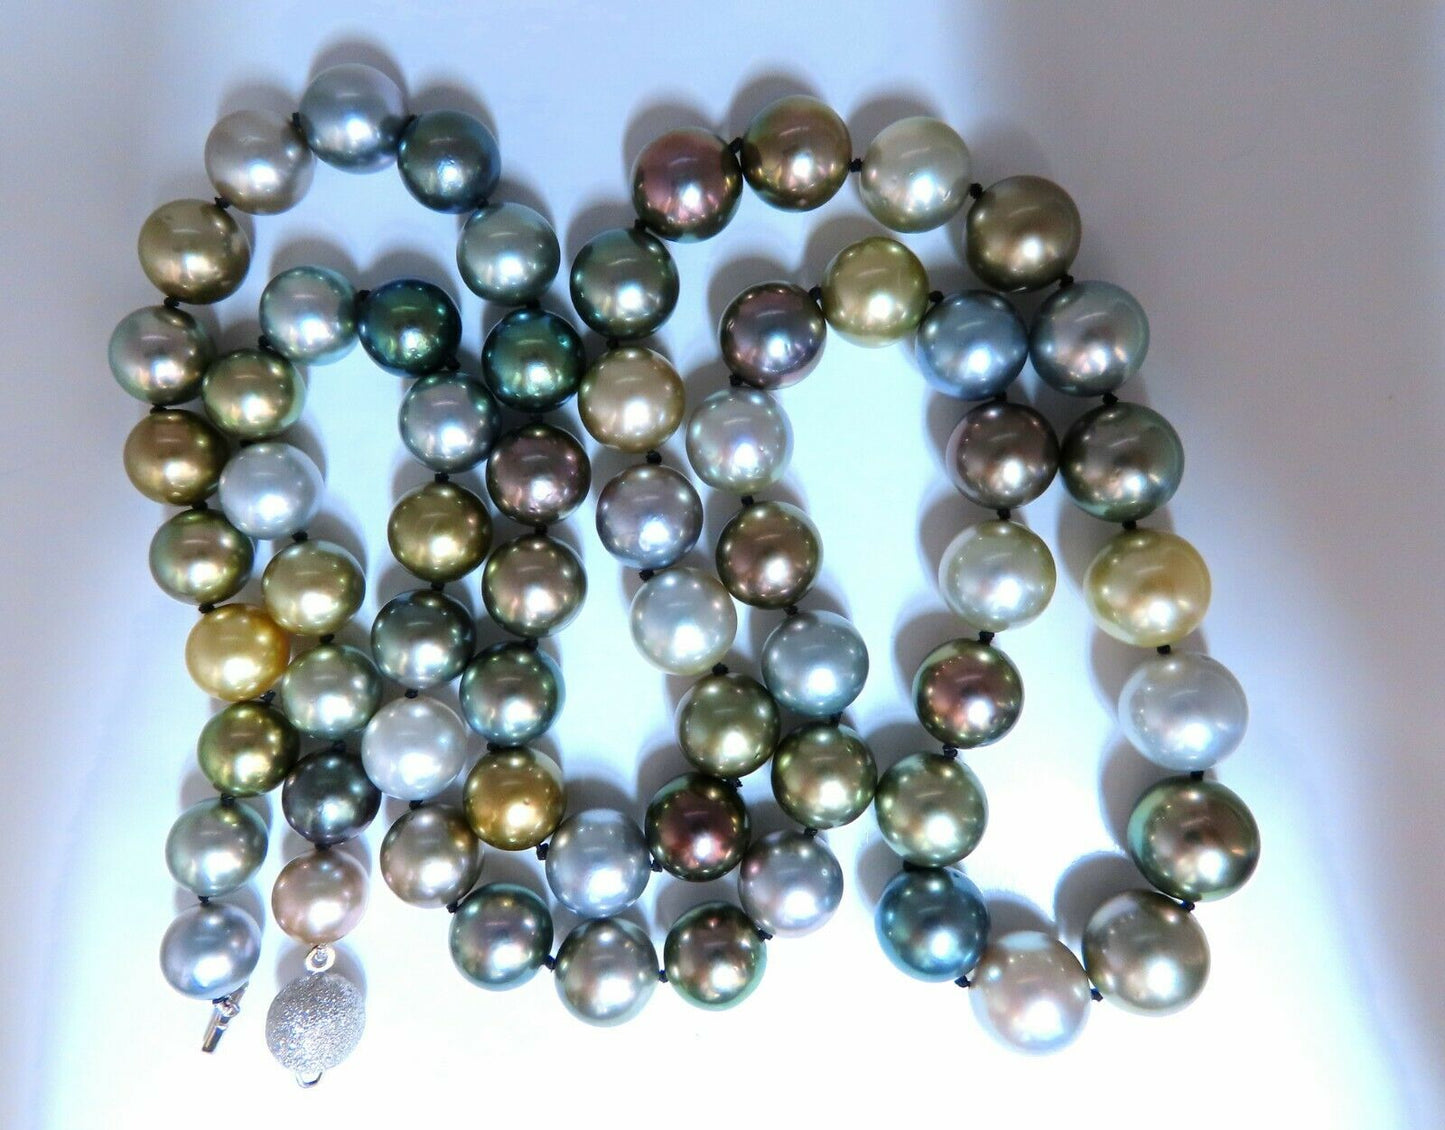 GIA certified Natural Multicolor Tahitian Saltwater Pearls necklace 14.9m 14k